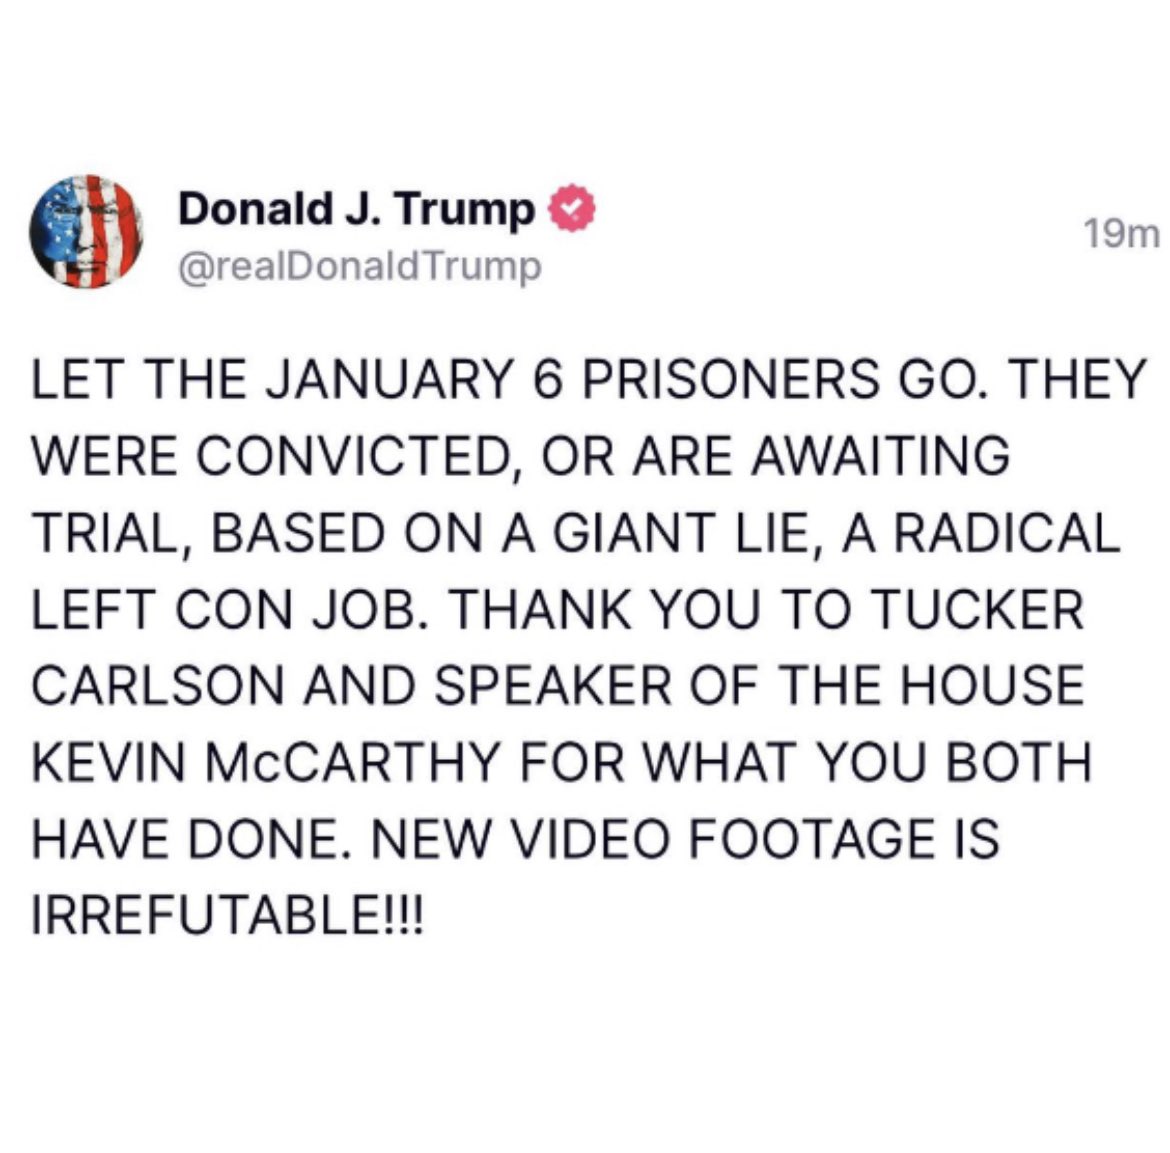 @realDonaldTrump has spoken. The corruption of #J6committeelied and the disgusting continued #J6CoverUp isn’t surprising. It clearly shows why the entire system is sh*t! #FreeJ6PrisonersNow